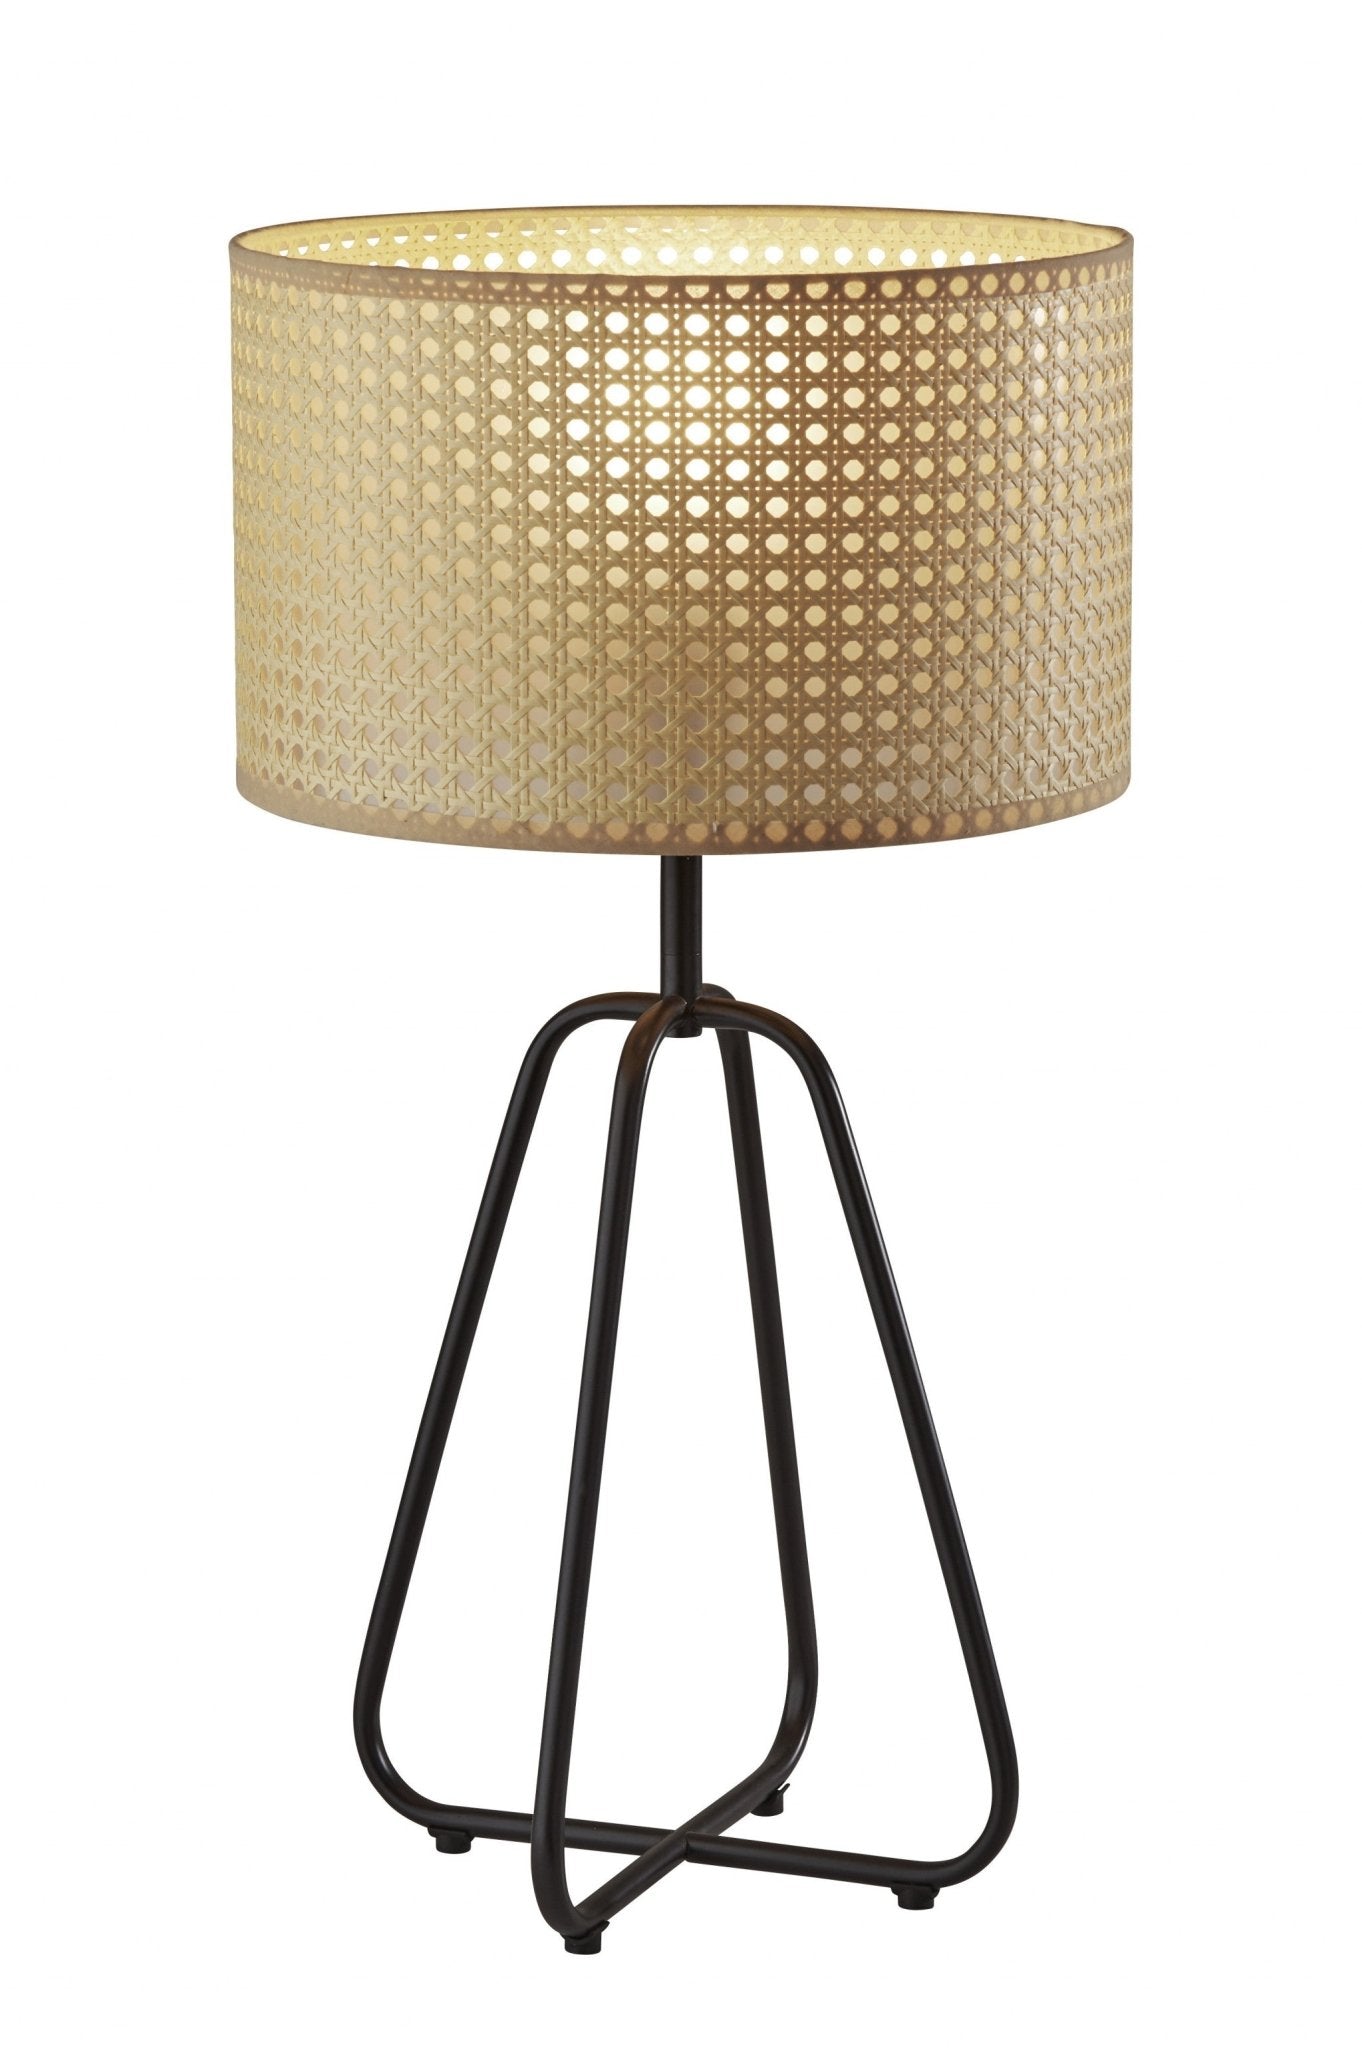 Open-Cane-Web-Natural-Shade-Dark-Bronze-Table-Lamp-Table-Lamps